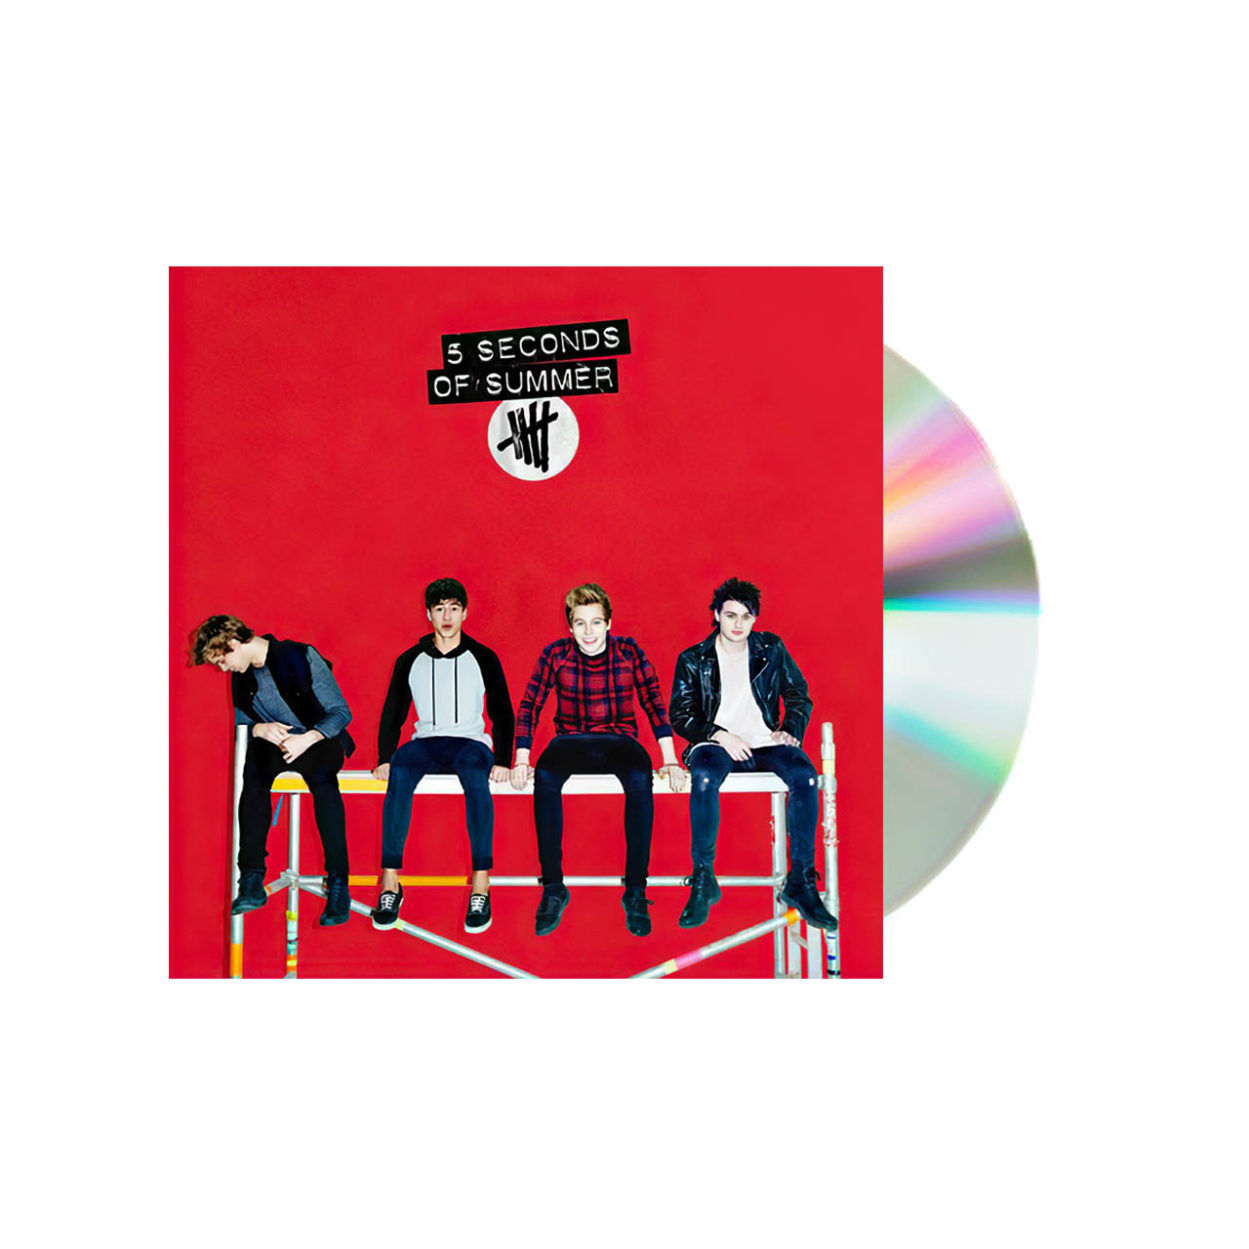 5 Seconds of summer self titled red cd